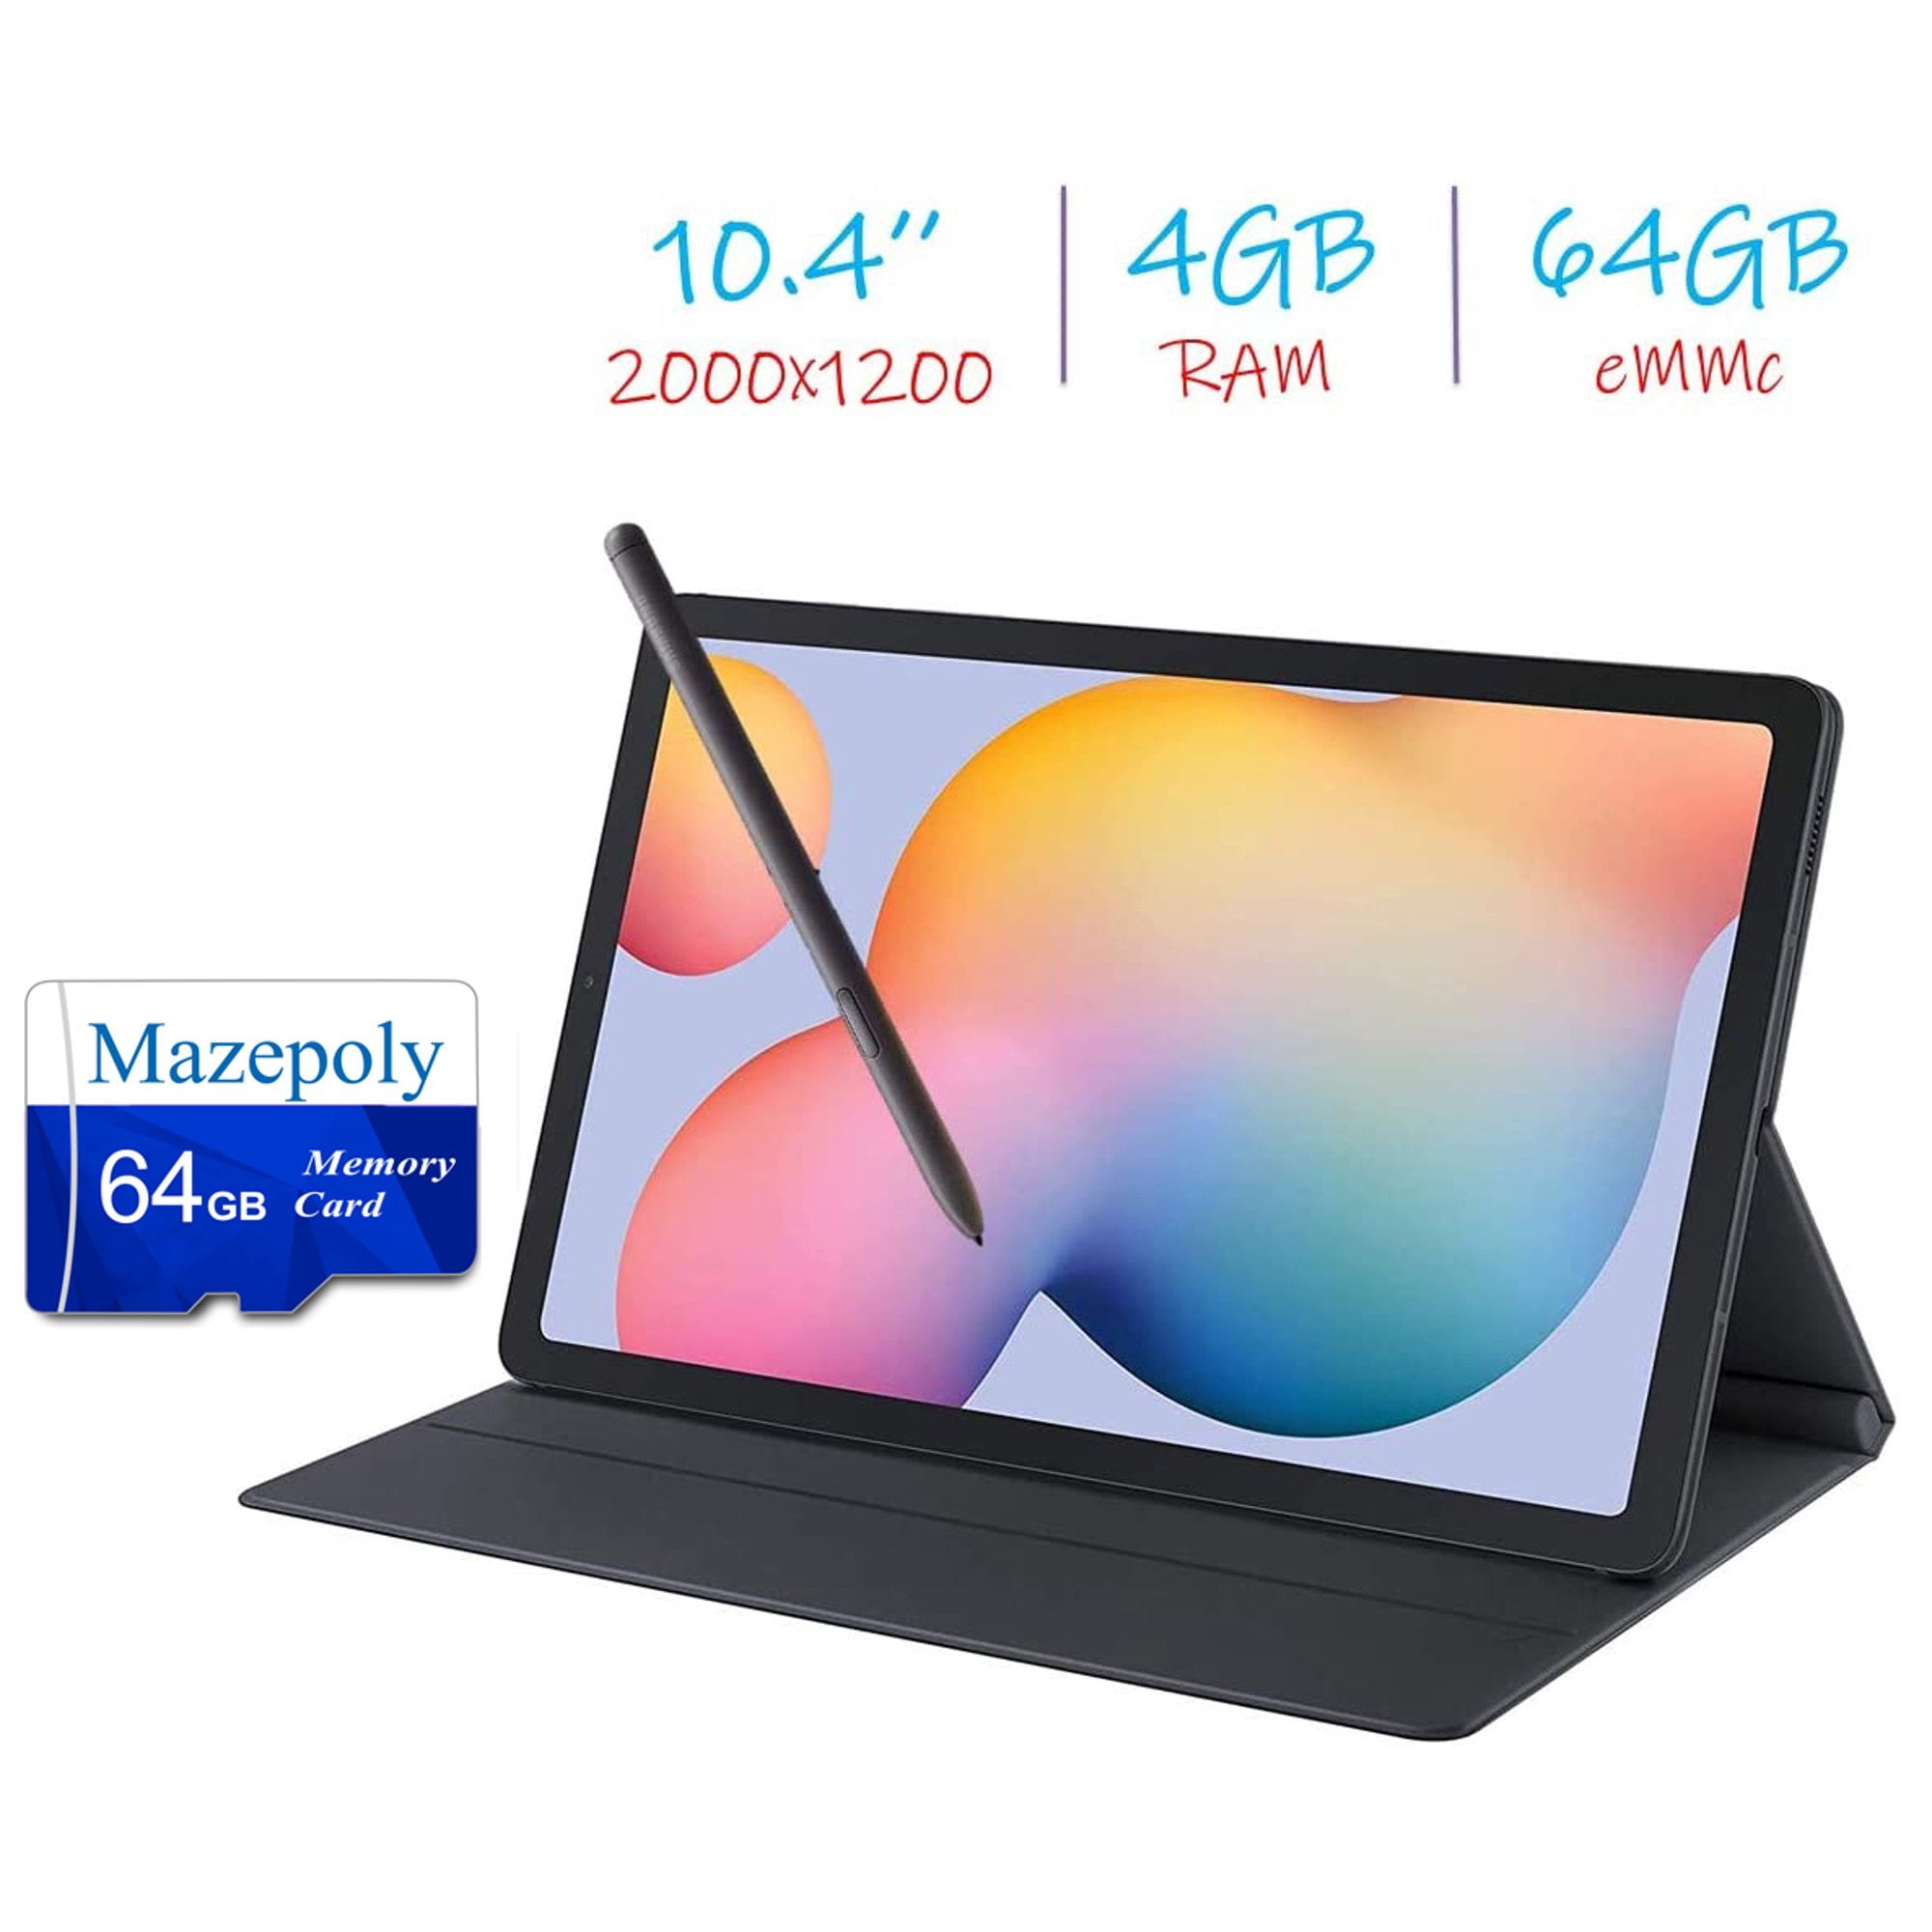 Samsung Galaxy Tab S6 Lite 10.4'' (2000x1200) WiFi Tablet Bundle, Exynos 9610, RAM, 64GB Storage, Bluetooth, Front & Rear Camera, Android 10, S Pen, Tablet with Mazepoly Accessories - Walmart.com